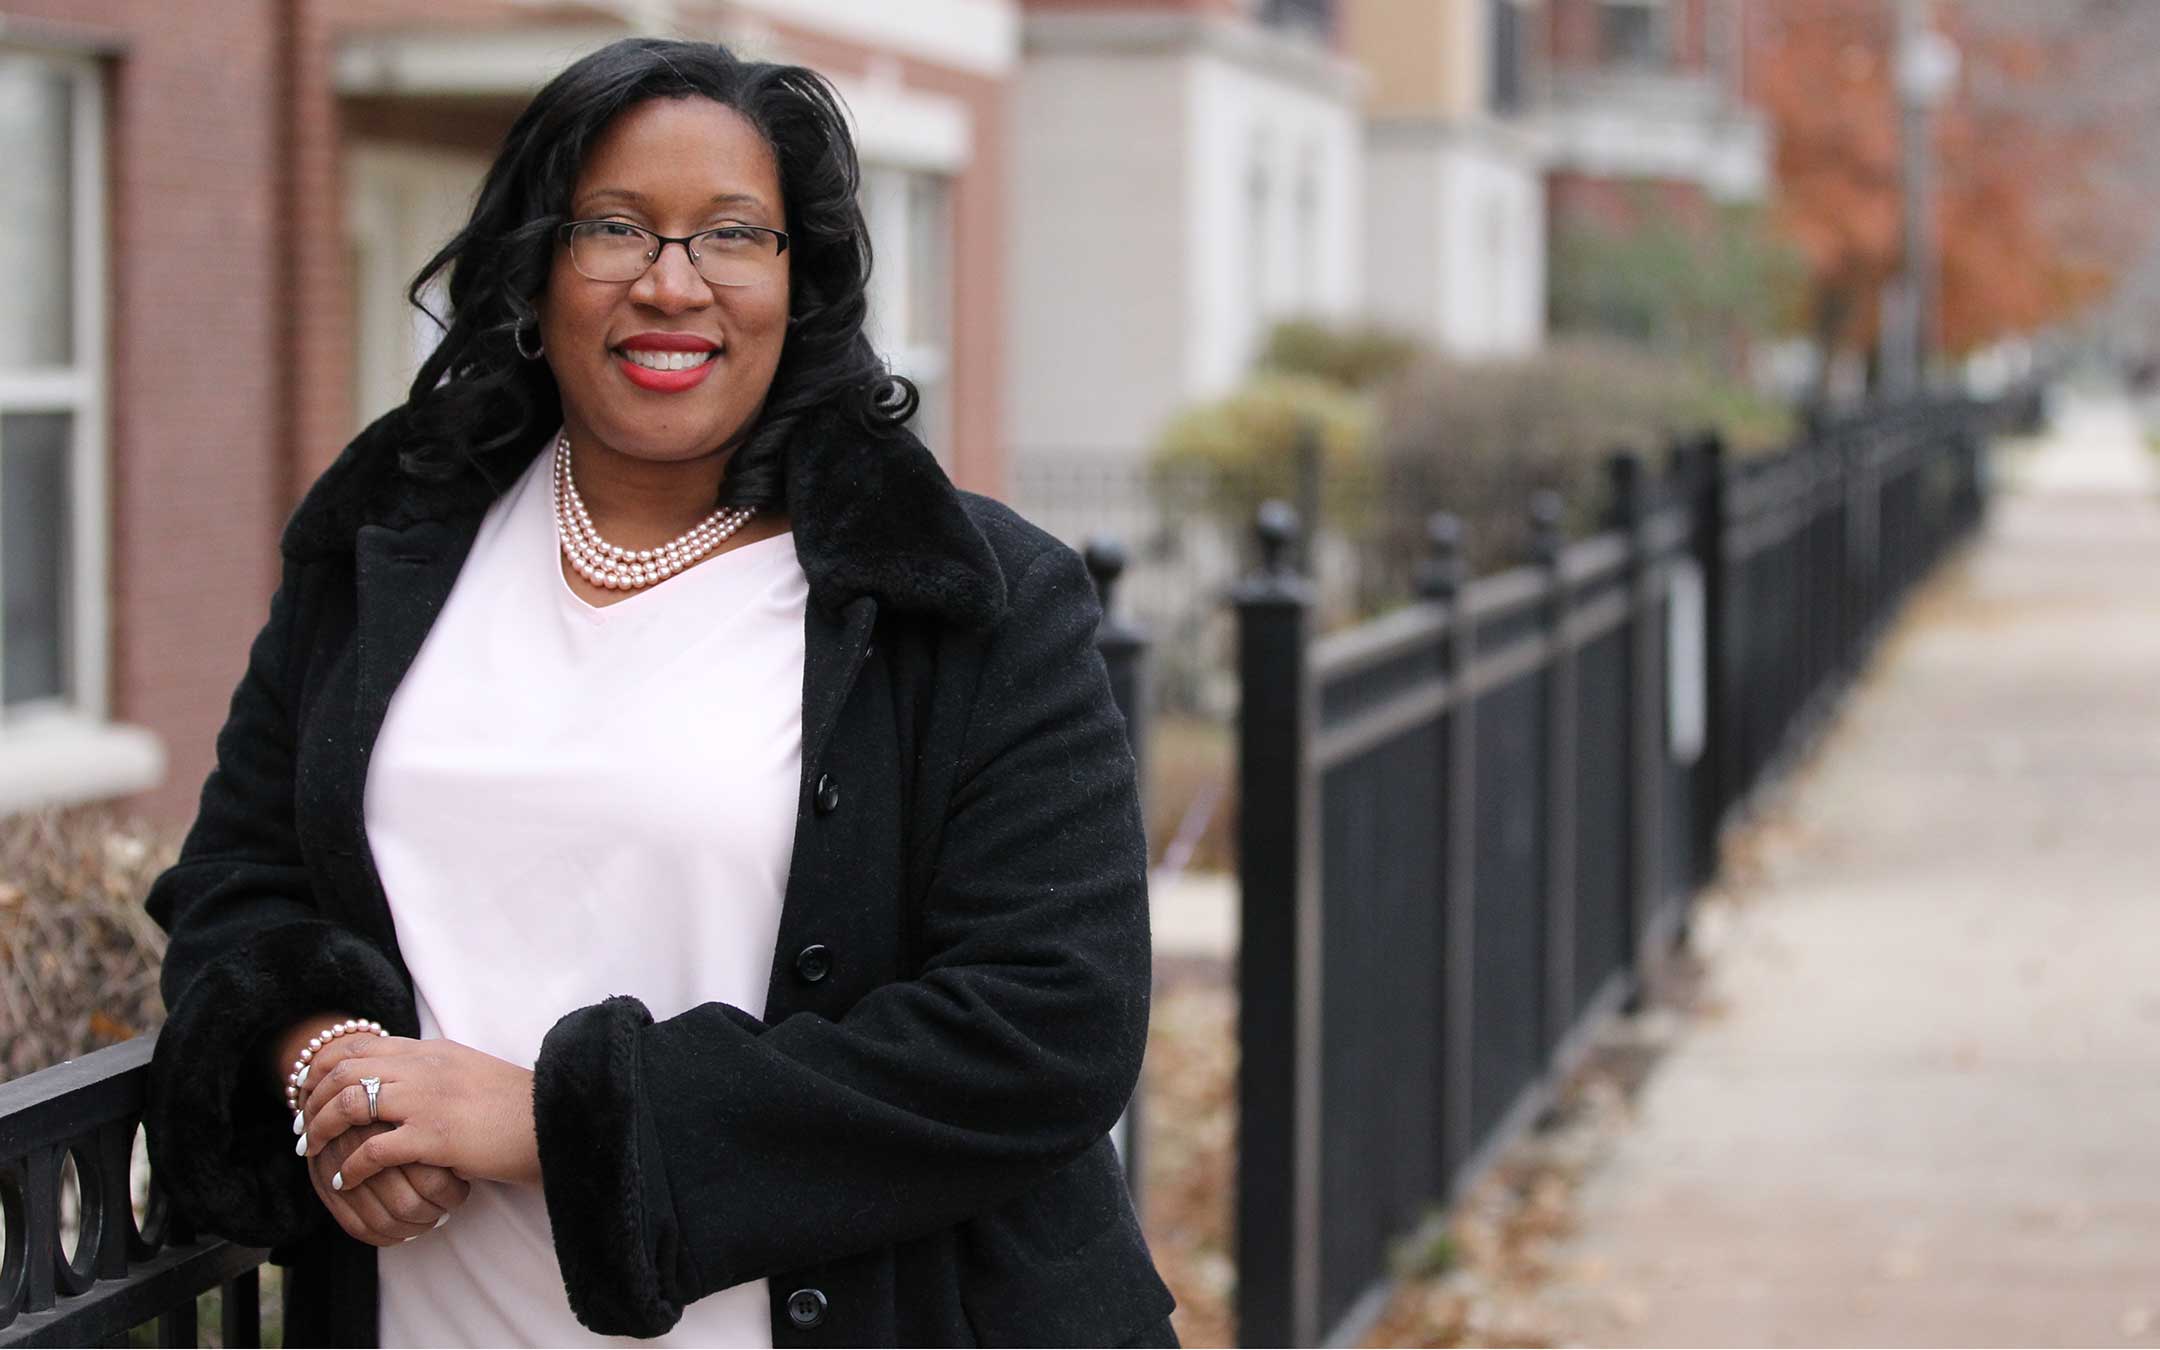 Roosevelt alum Melissa Conyears-Ervin, who is running for the city of Chicago treasurer in 2019